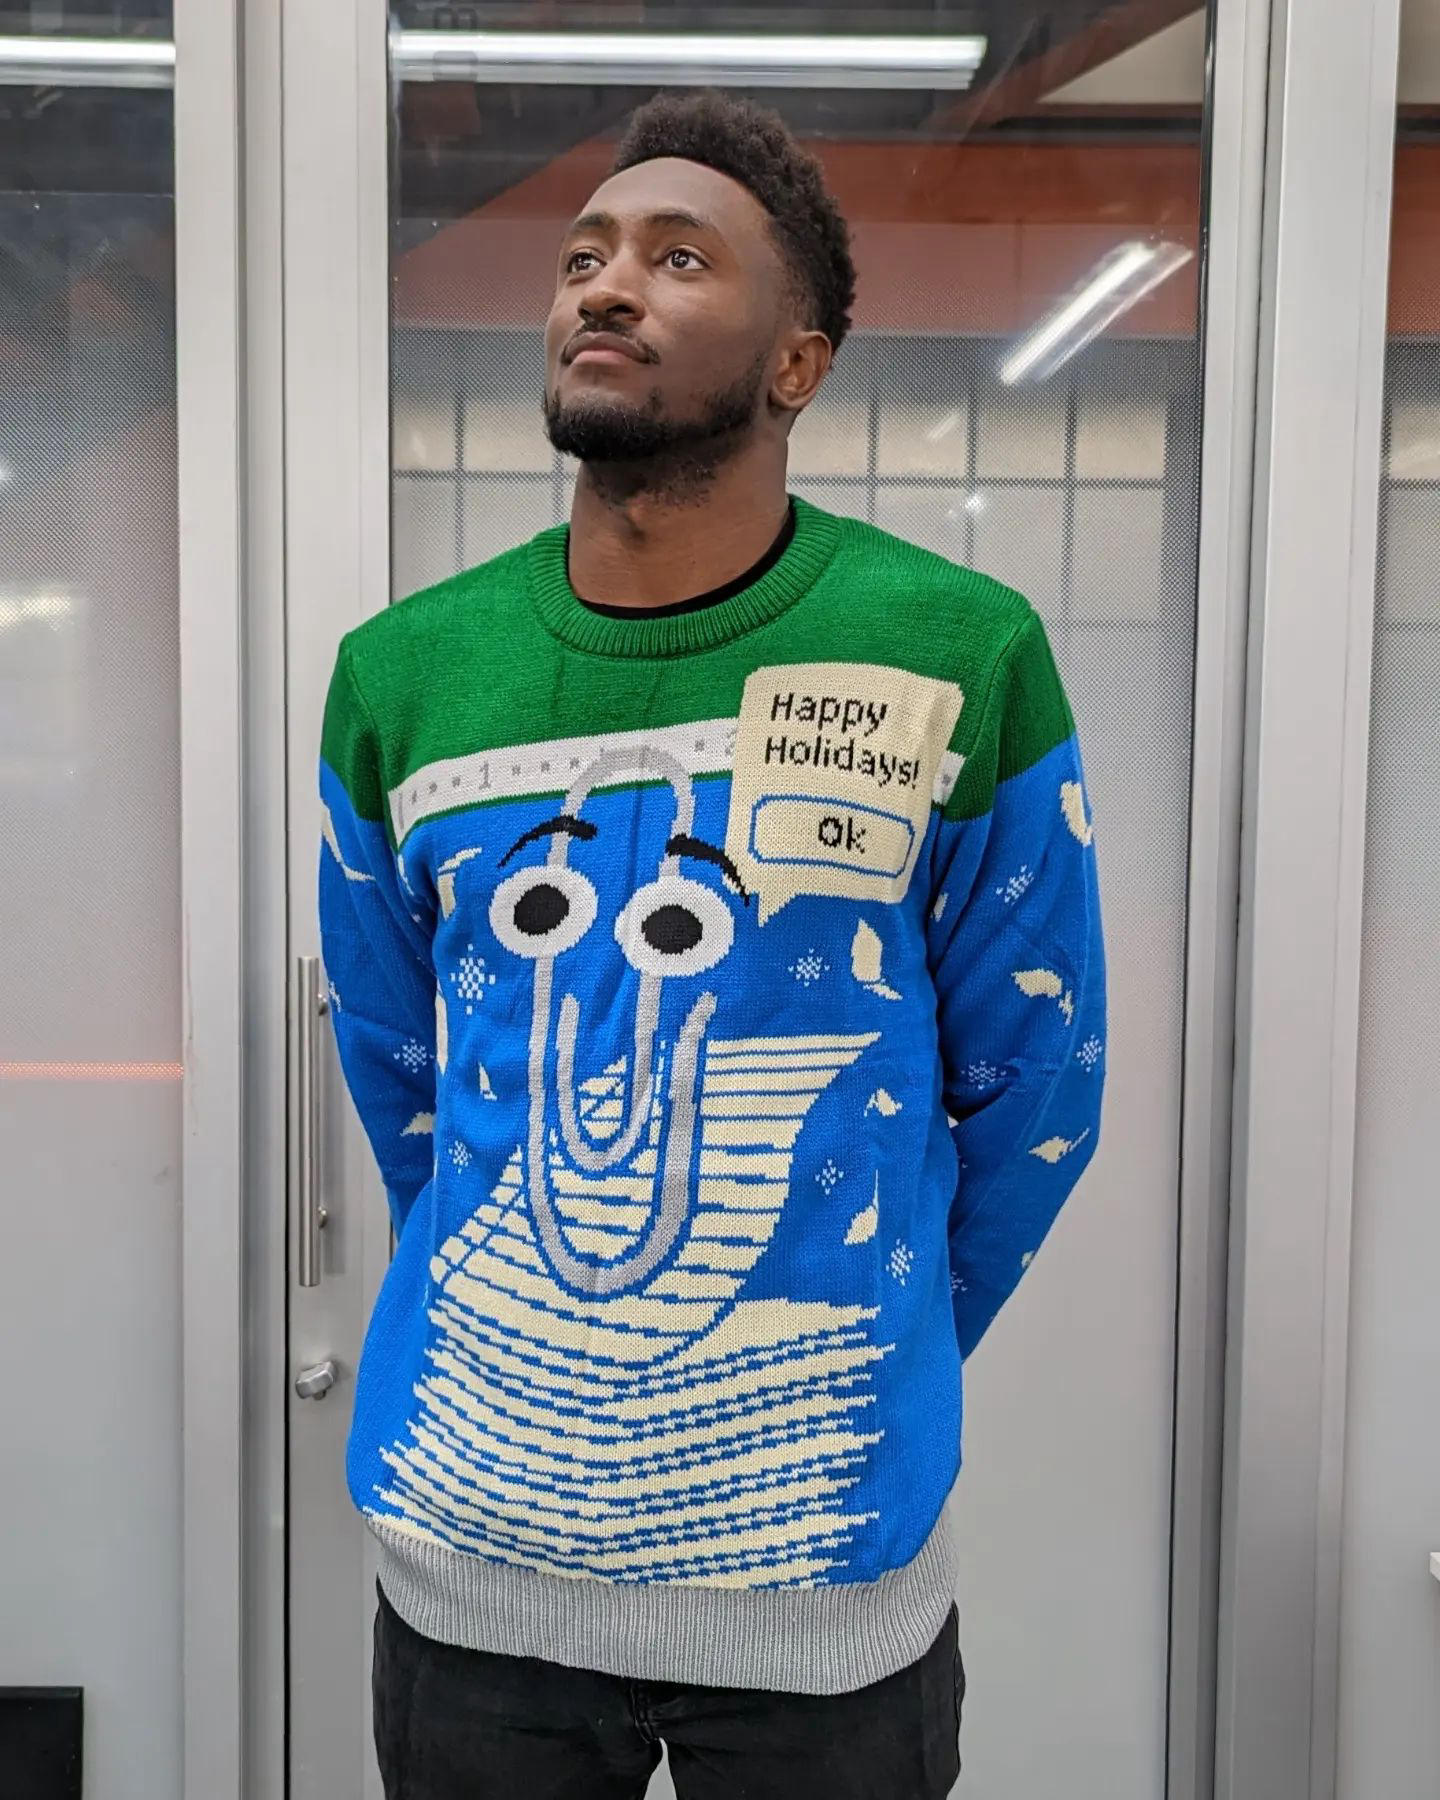 Marques Brownlee - It looks like you're trying to get into the Holiday spirit